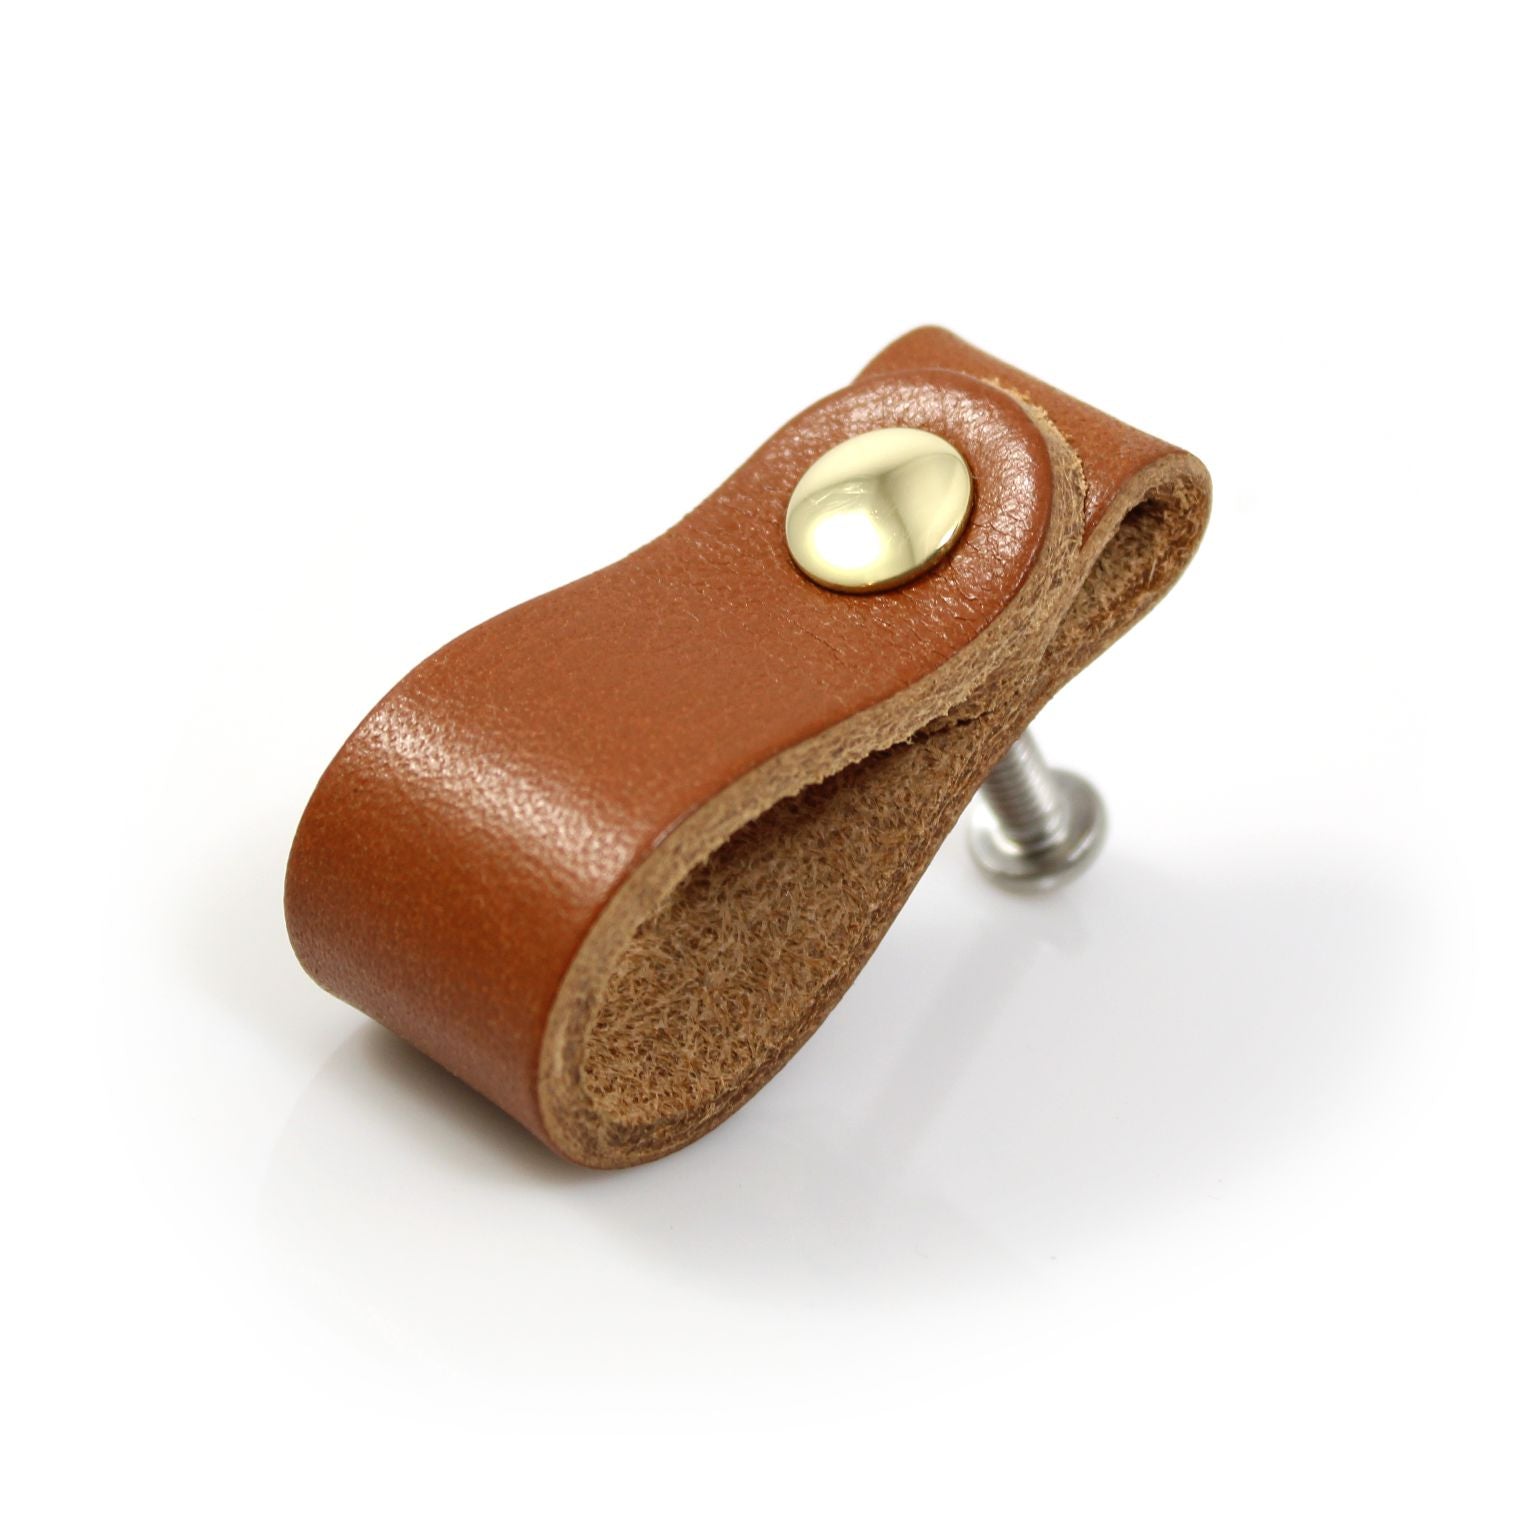 leather drawer pulls by Makeline Designs, Brandy Leather with Brass Hardware